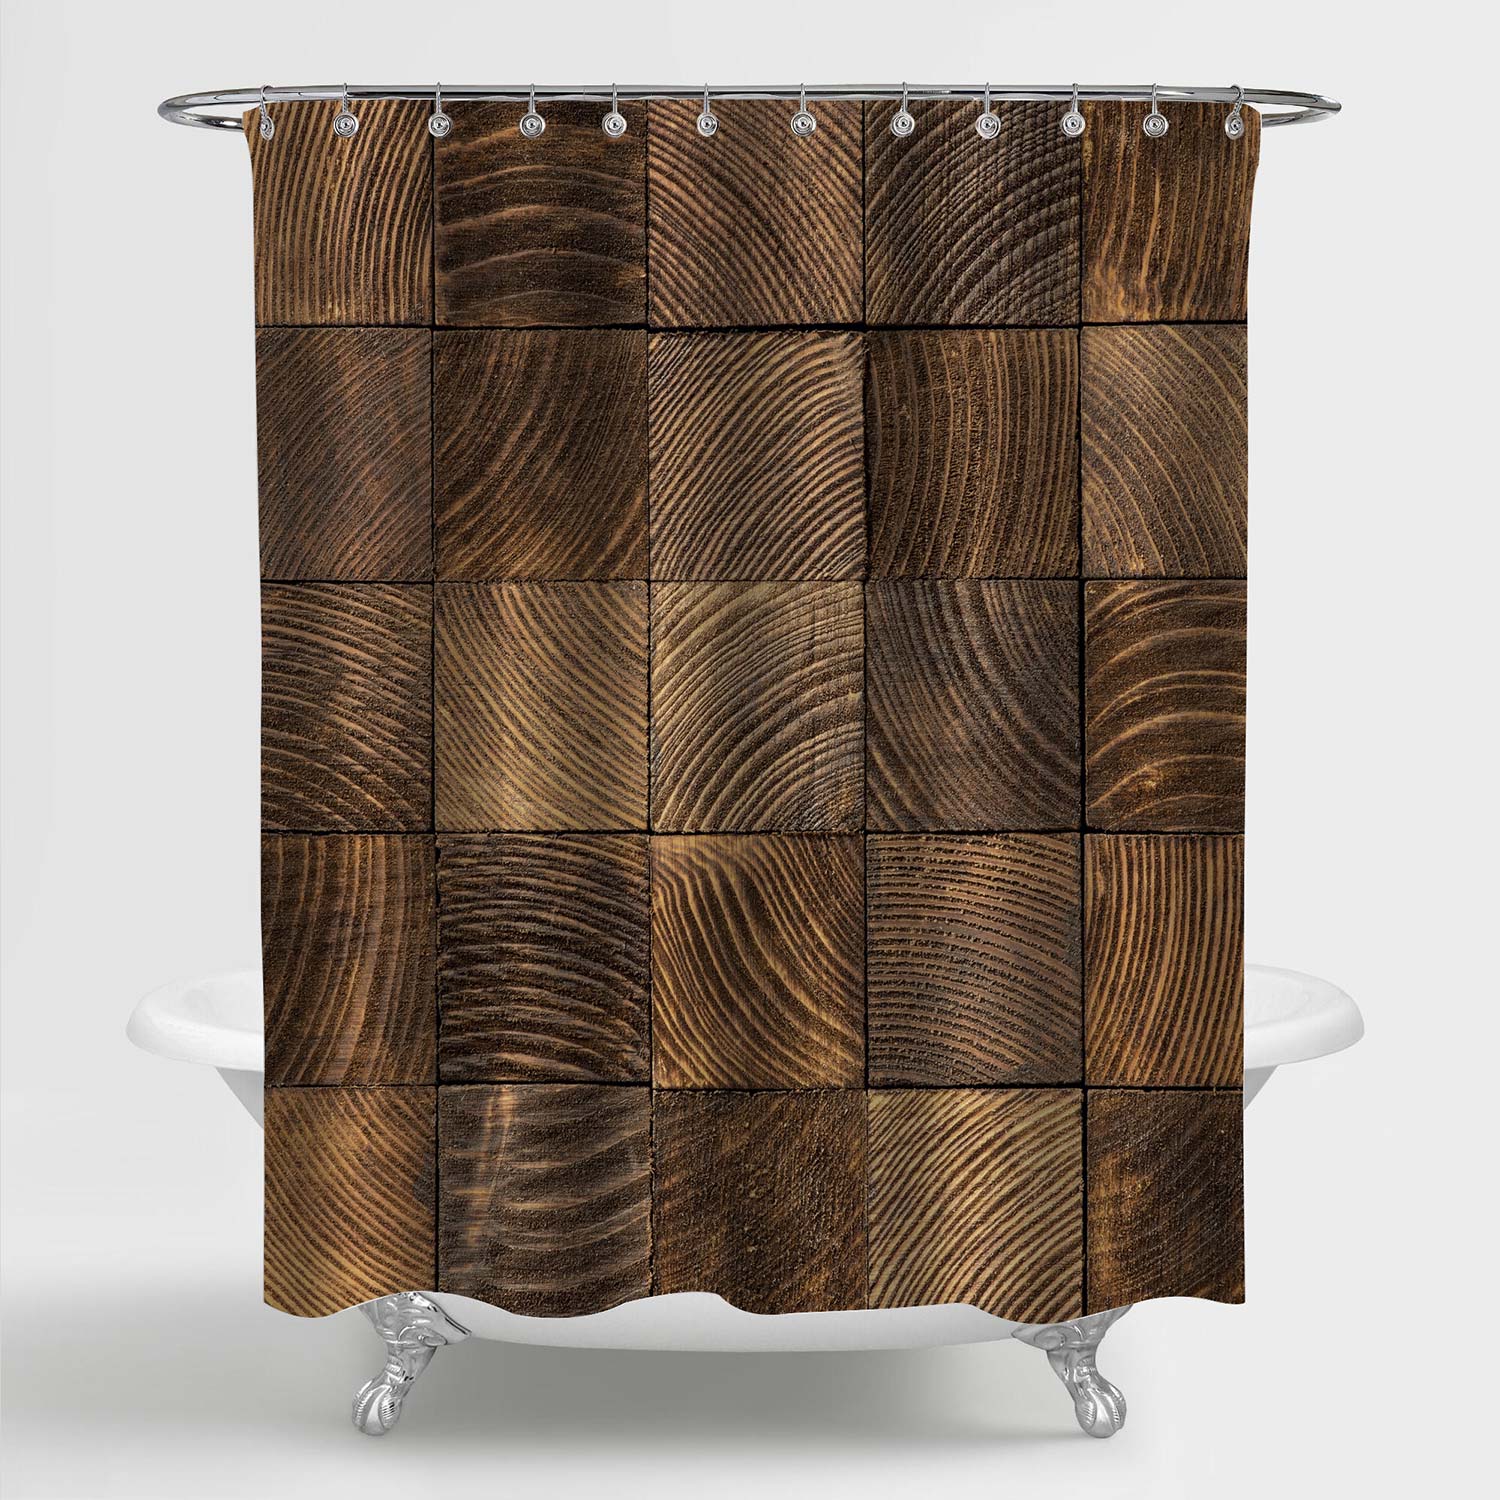 Shower Curtain Decor Woven Black Marble Amp Dull Brown Le Shower Curta –  BigProStore